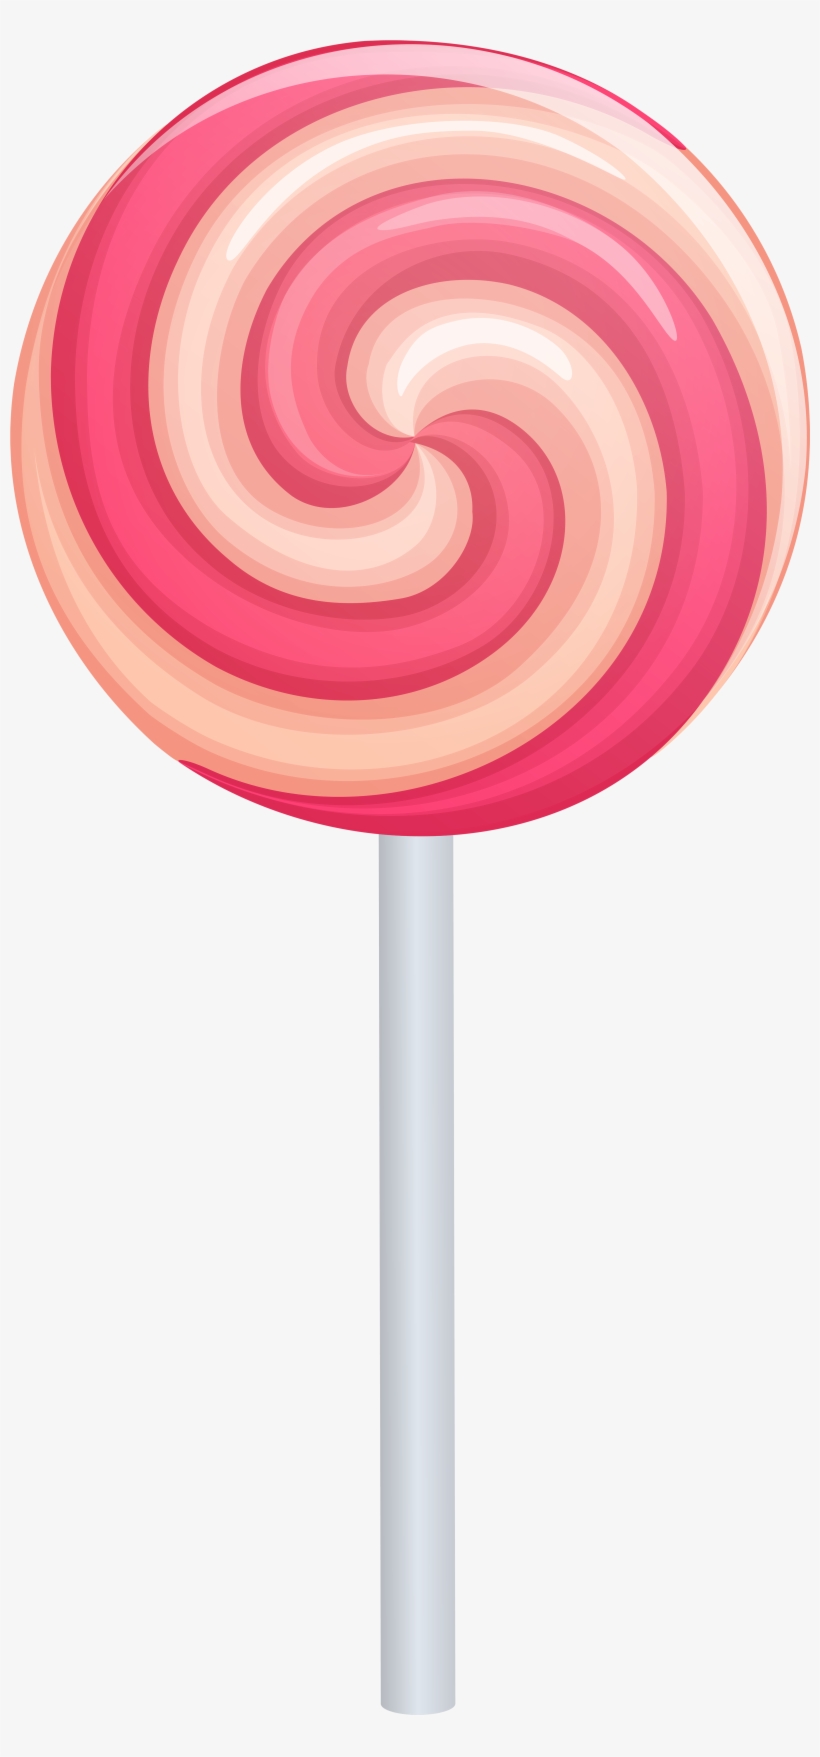 Pink Swirl Png Clip Art Image Gallery, transparent png #145491